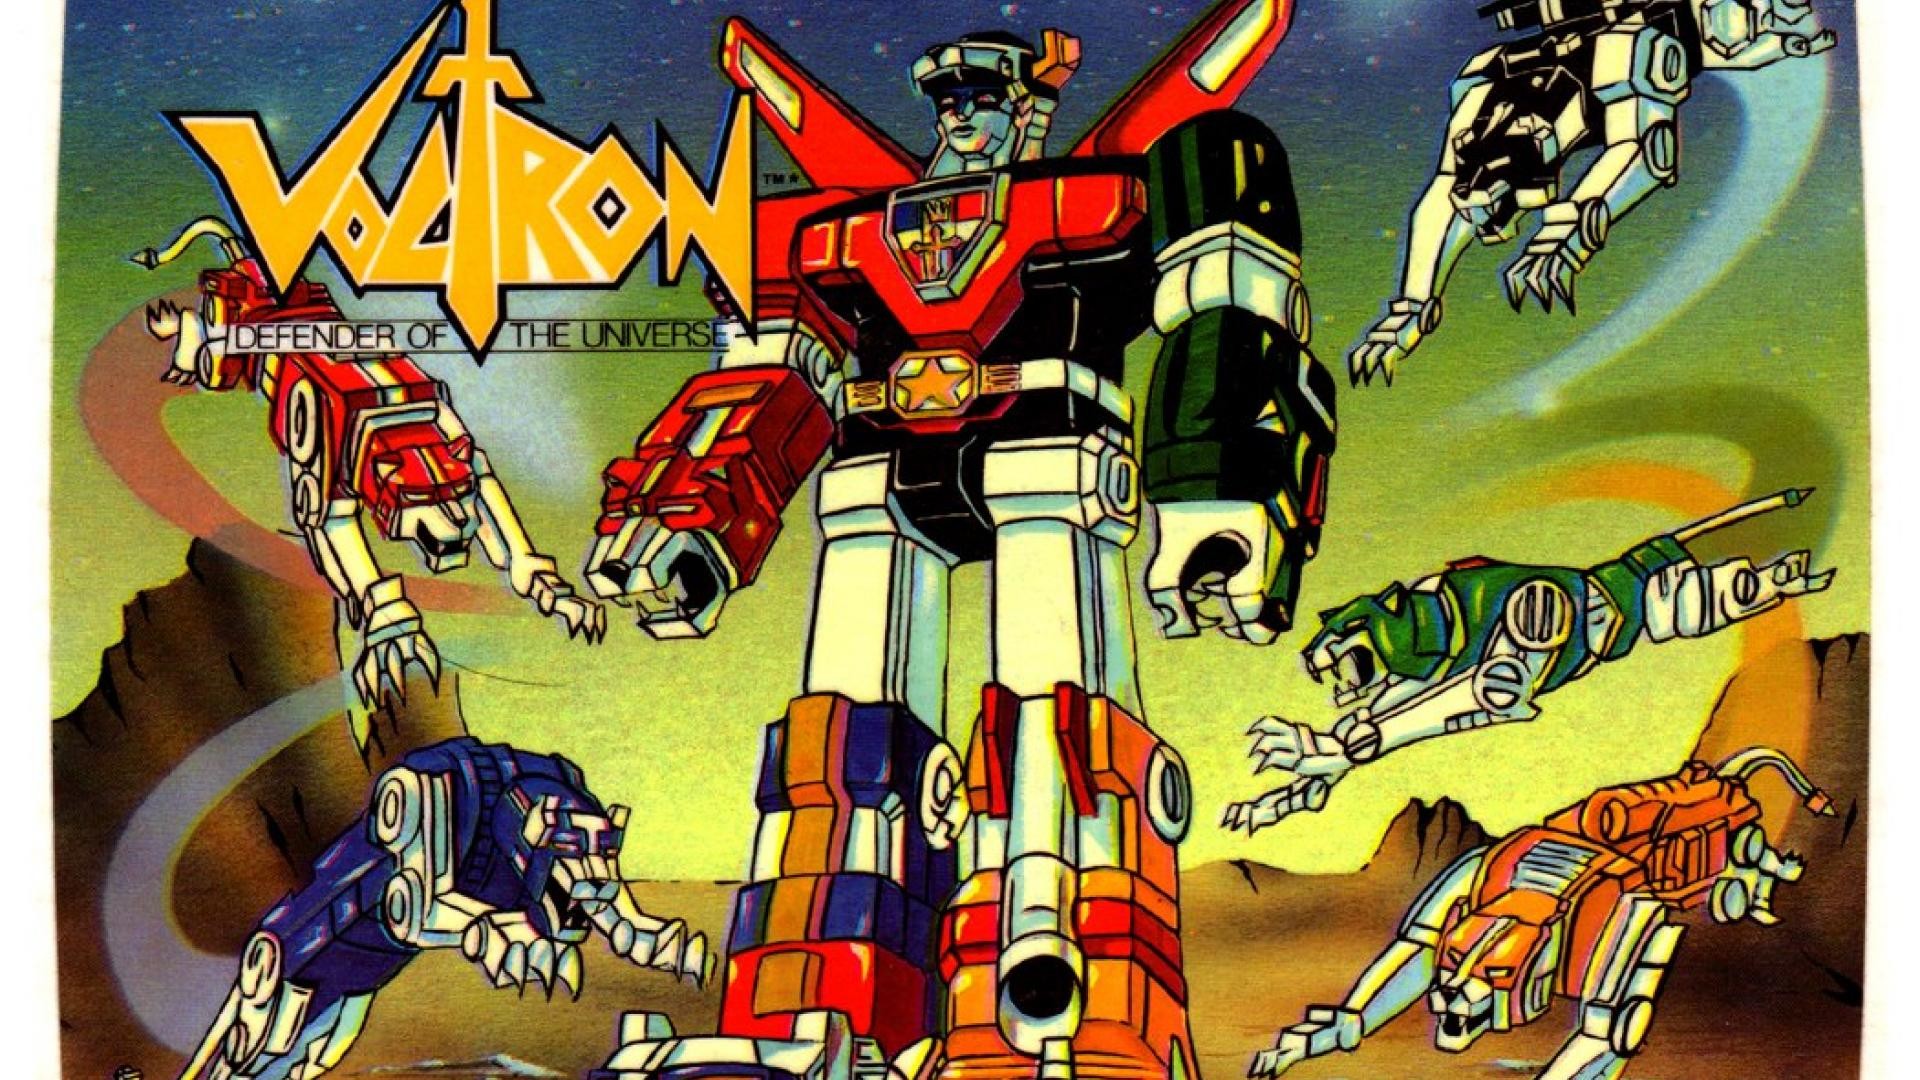 1920x1080 Voltron at 3B Cancelled by Red Sox; Plouffe Signs with the A's | The 300s